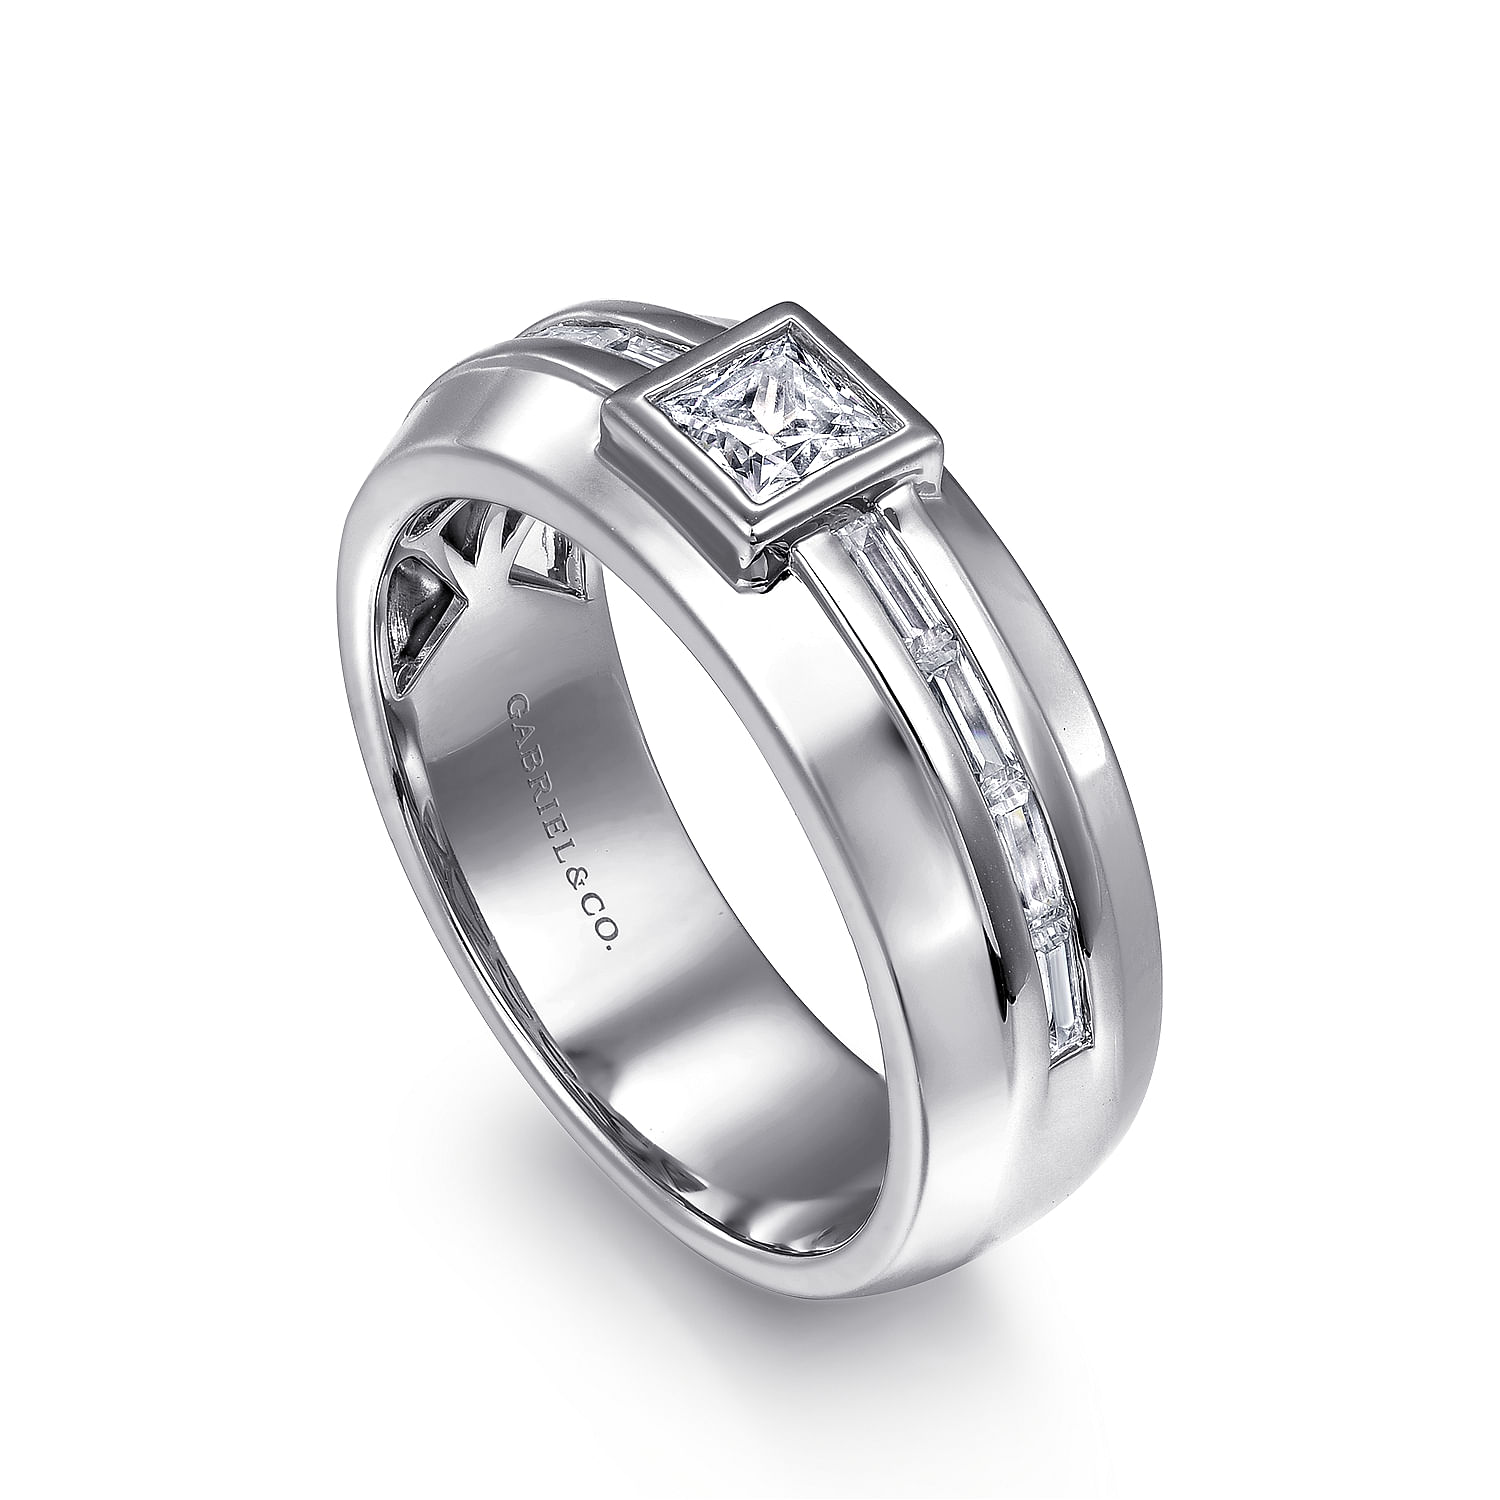 14K White Gold Diamond Mens Engagement Ring in High Polished Finish